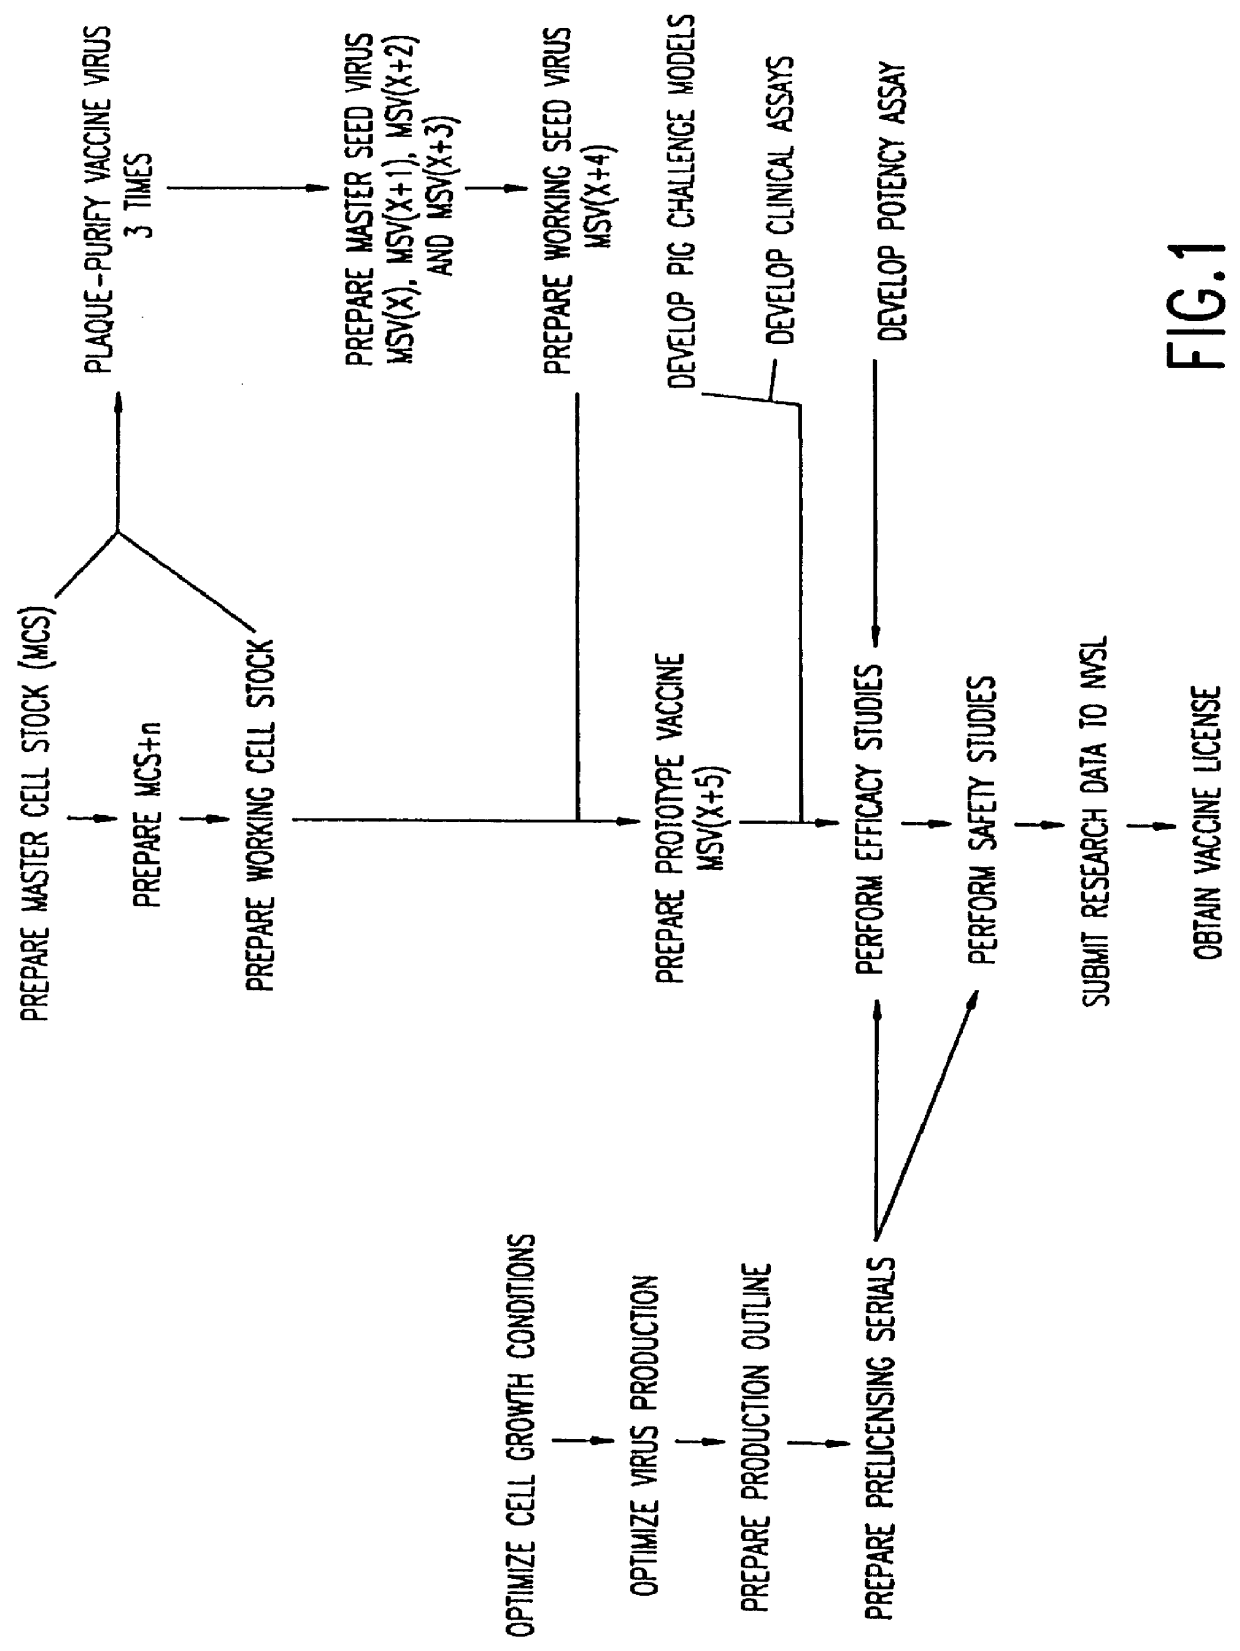 Isolated porcine respiratory and reproductive virus, vaccines and methods of protecting a pig against a disease caused by a porcine respiratory and reproductive virus